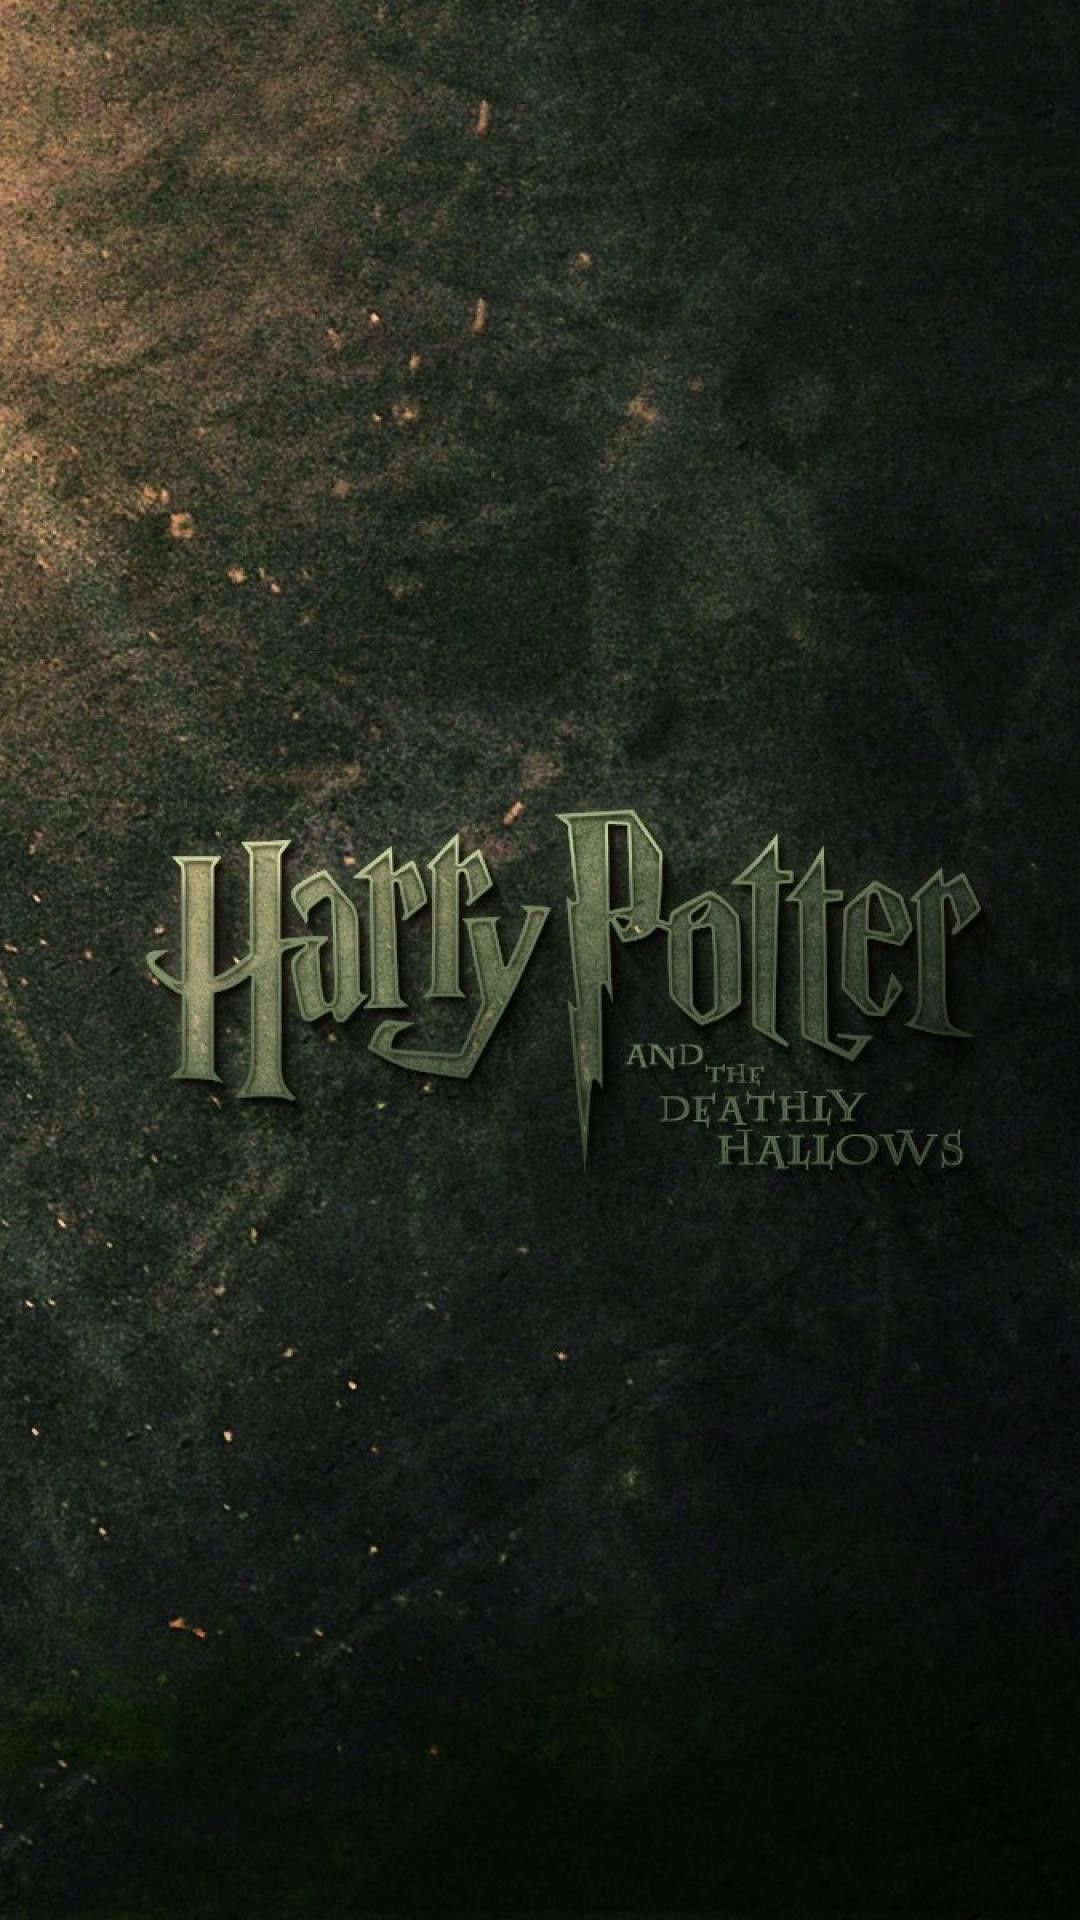 Harry Potter Droid Wallpapers on WallpaperDog